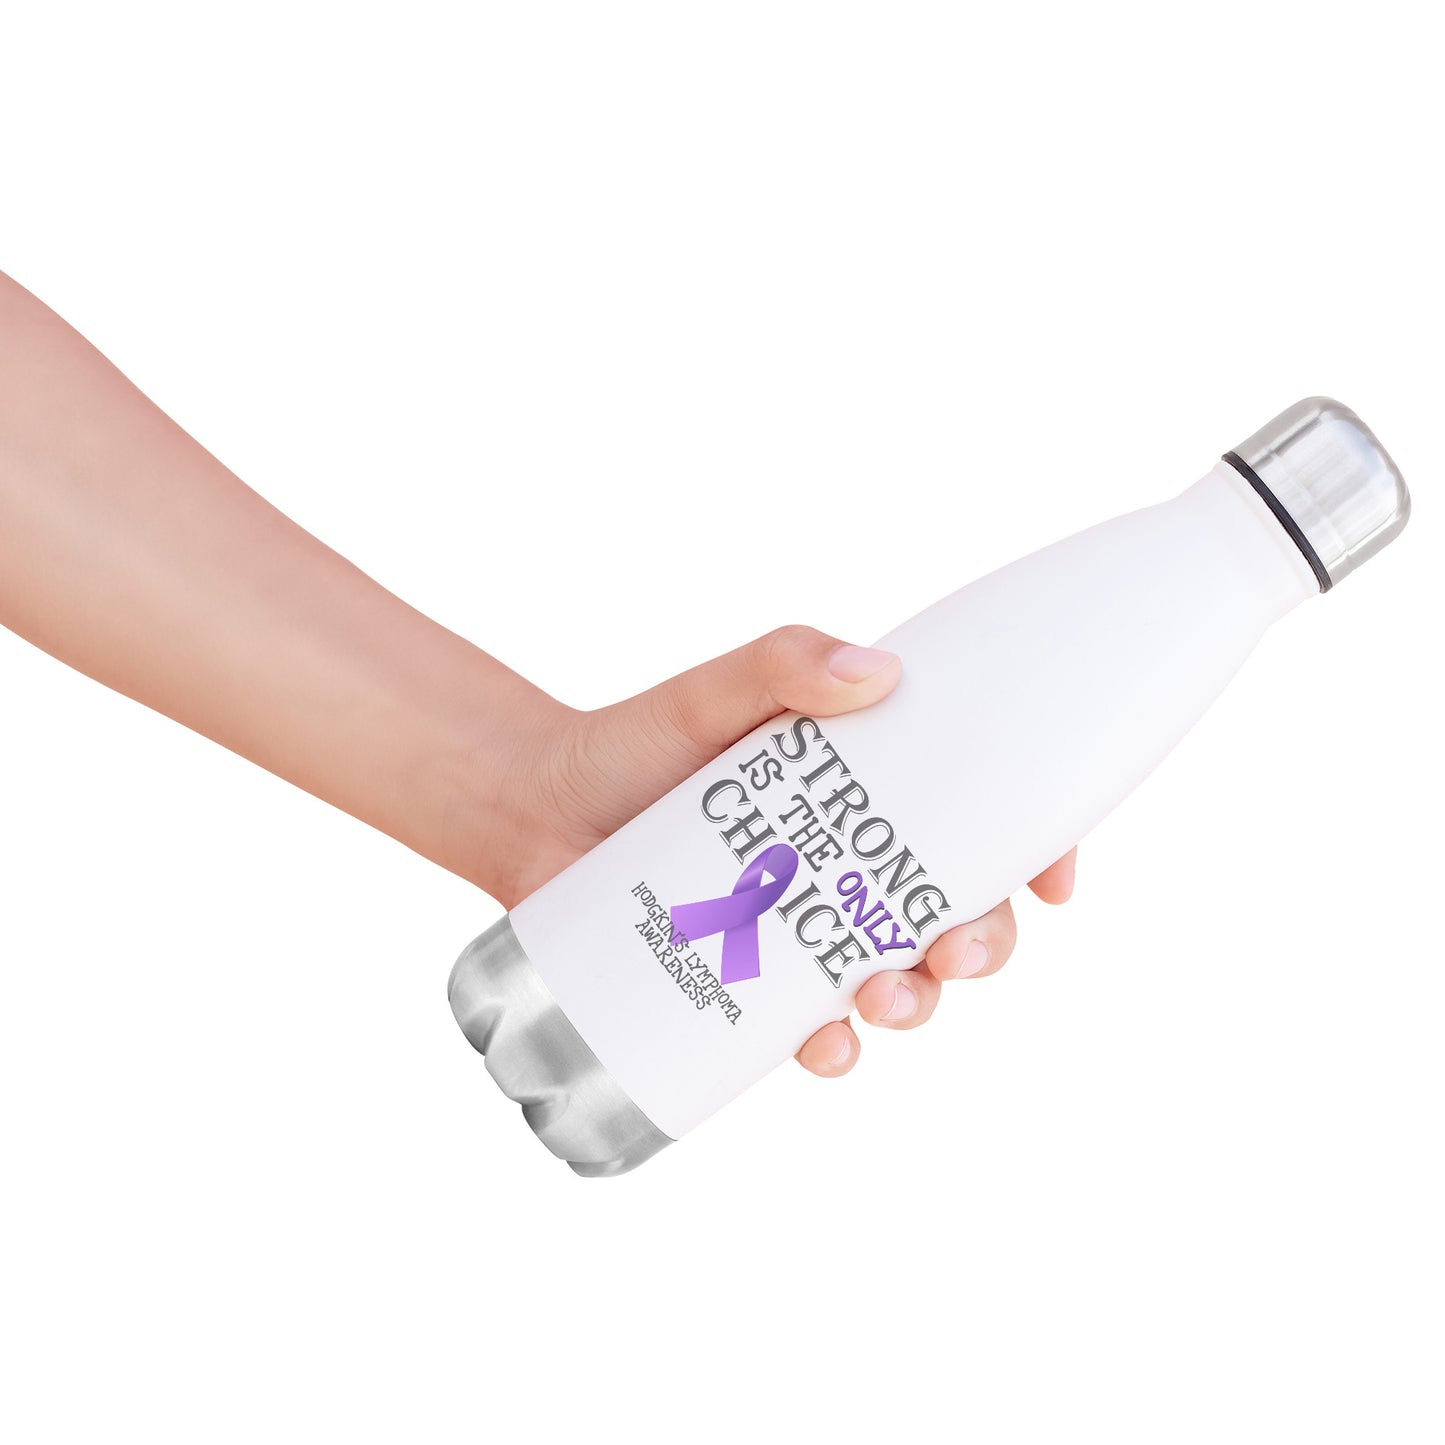 Strong is the Only Choice -Hodgkin's Lymphoma Awareness 20oz Insulated Water Bottle